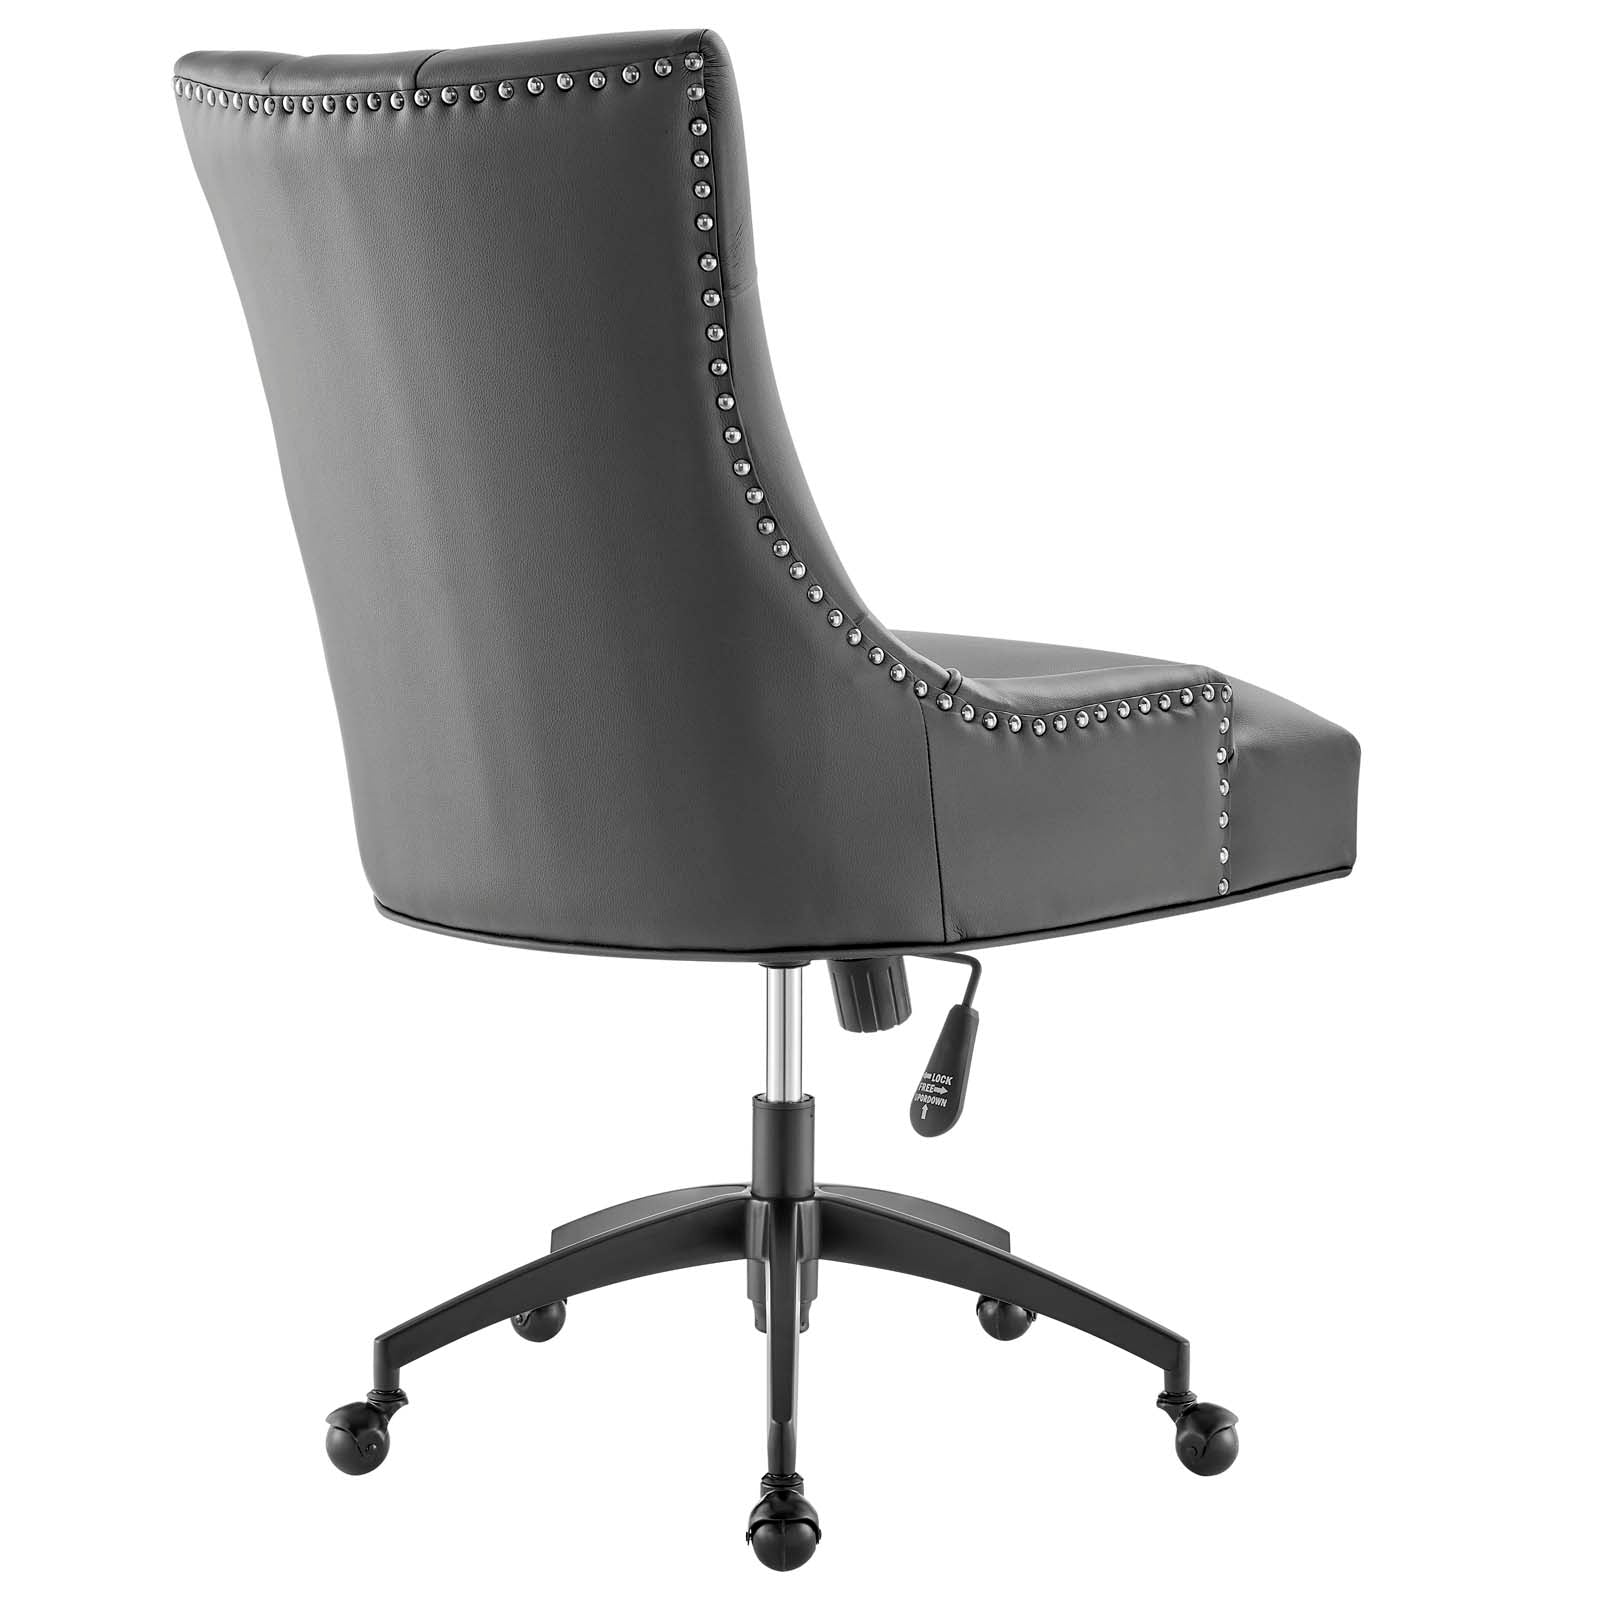 Modway Task Chairs - Regent Tufted Vegan Leather Office Chair Black Gray